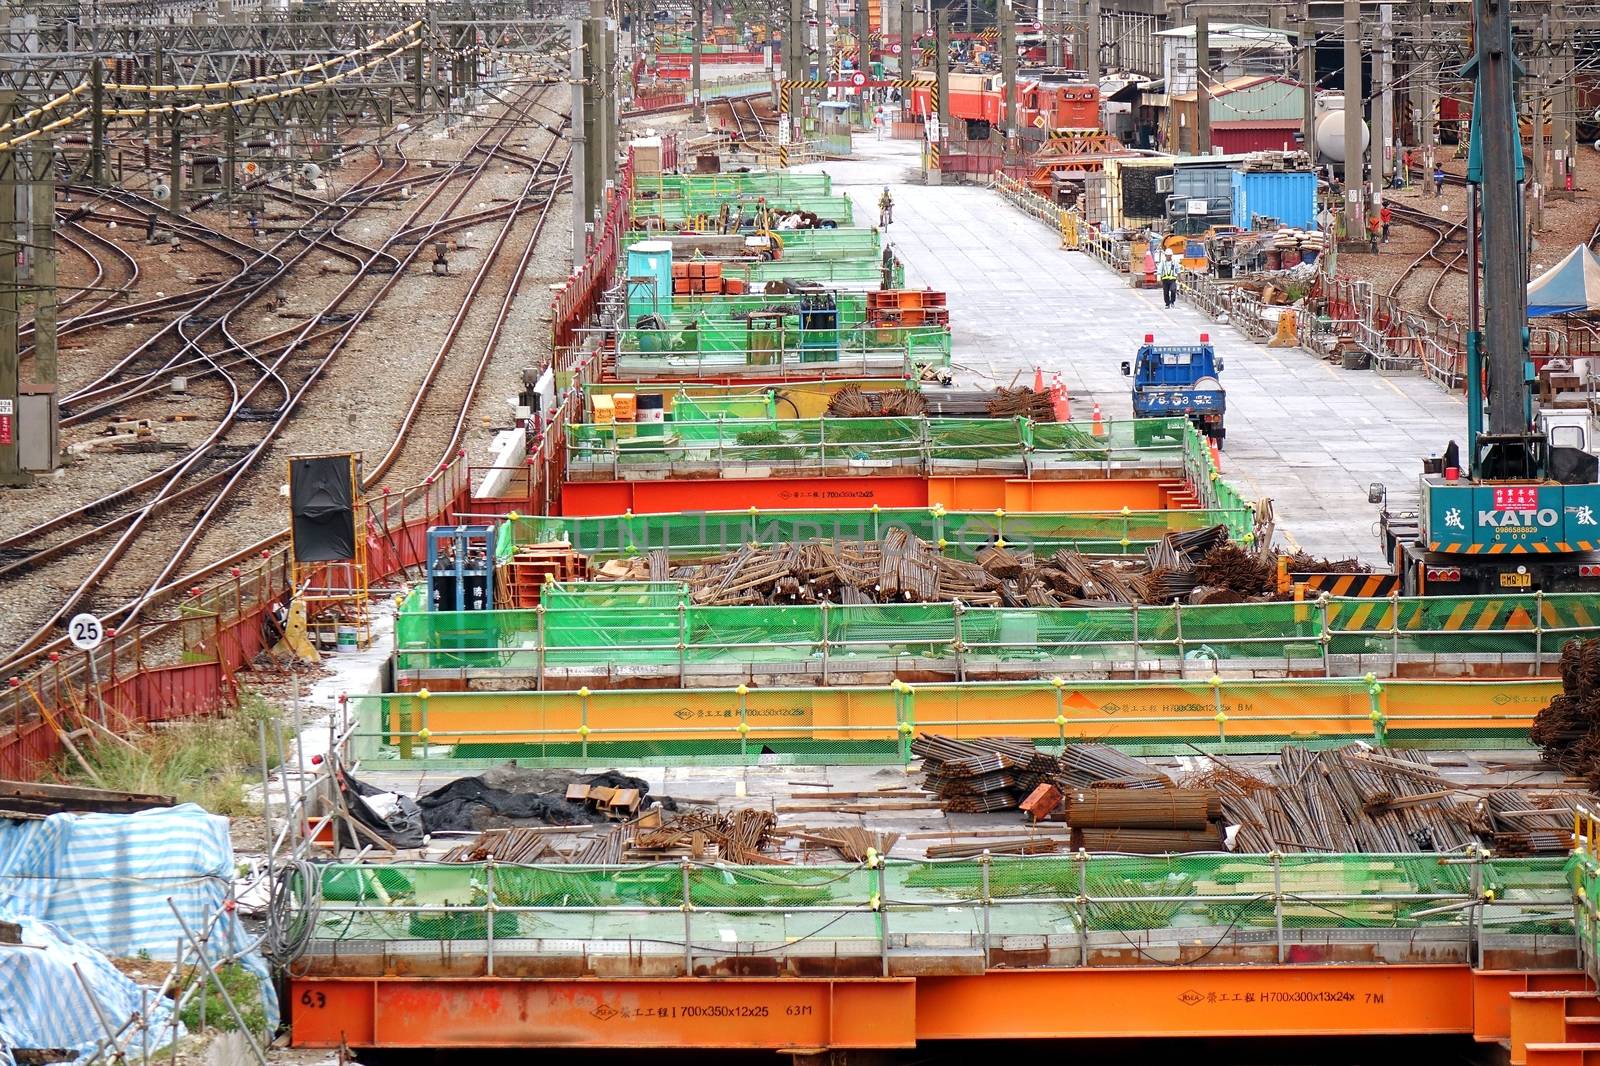 KAOHSIUNG, TAIWAN -- AUGUST 15, 2015: Large scale construction work continues on the project to move the city rail tracks underground.